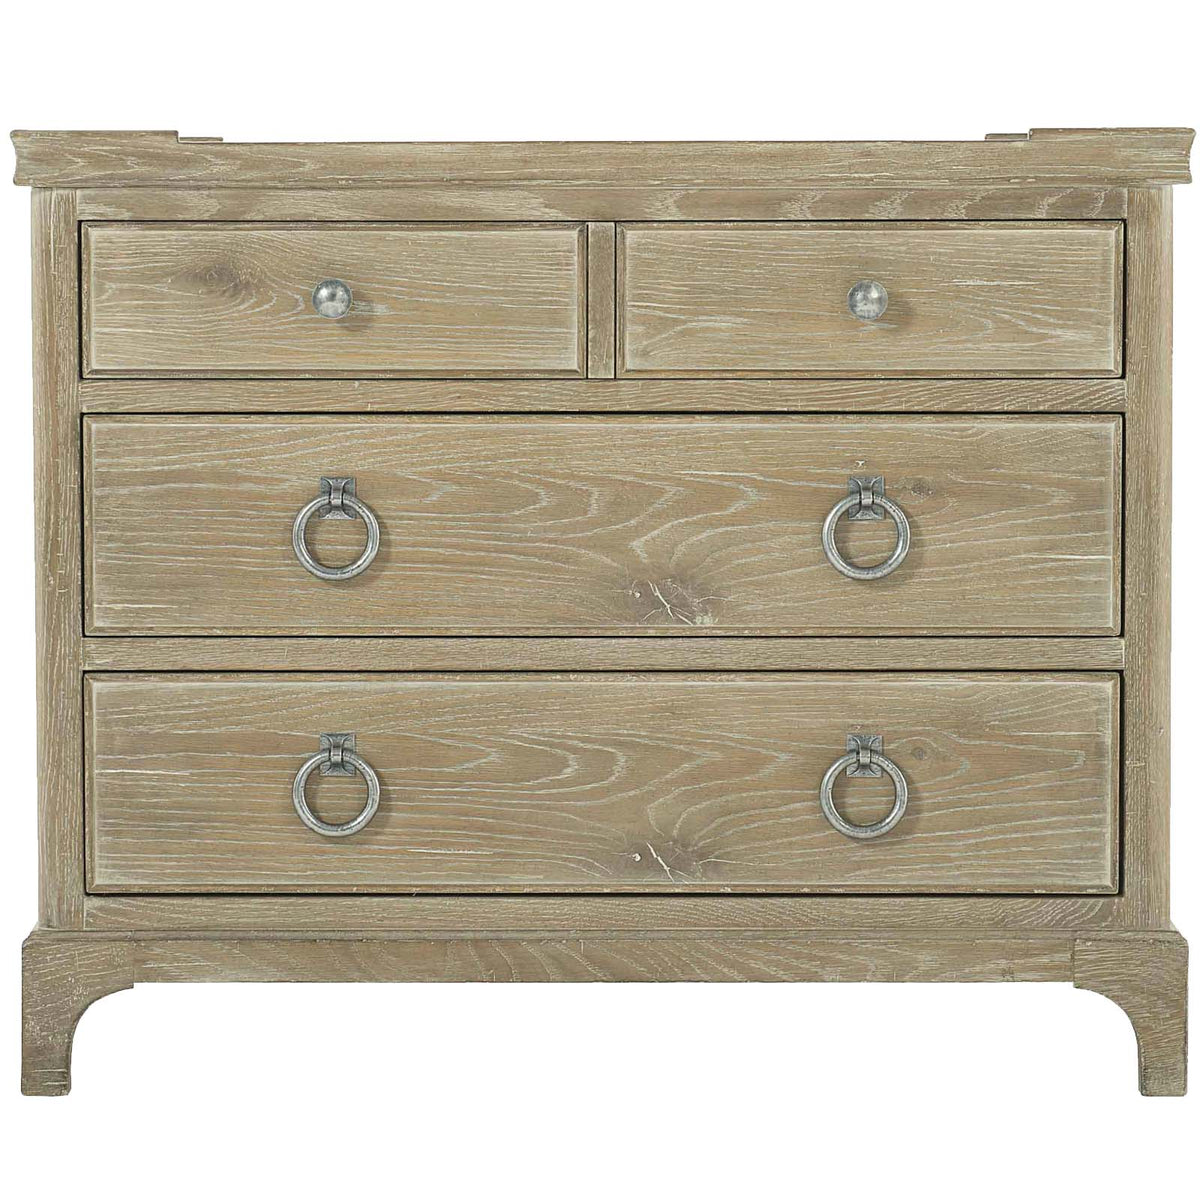 Rustic 5 Drawer Bachelor's Chest